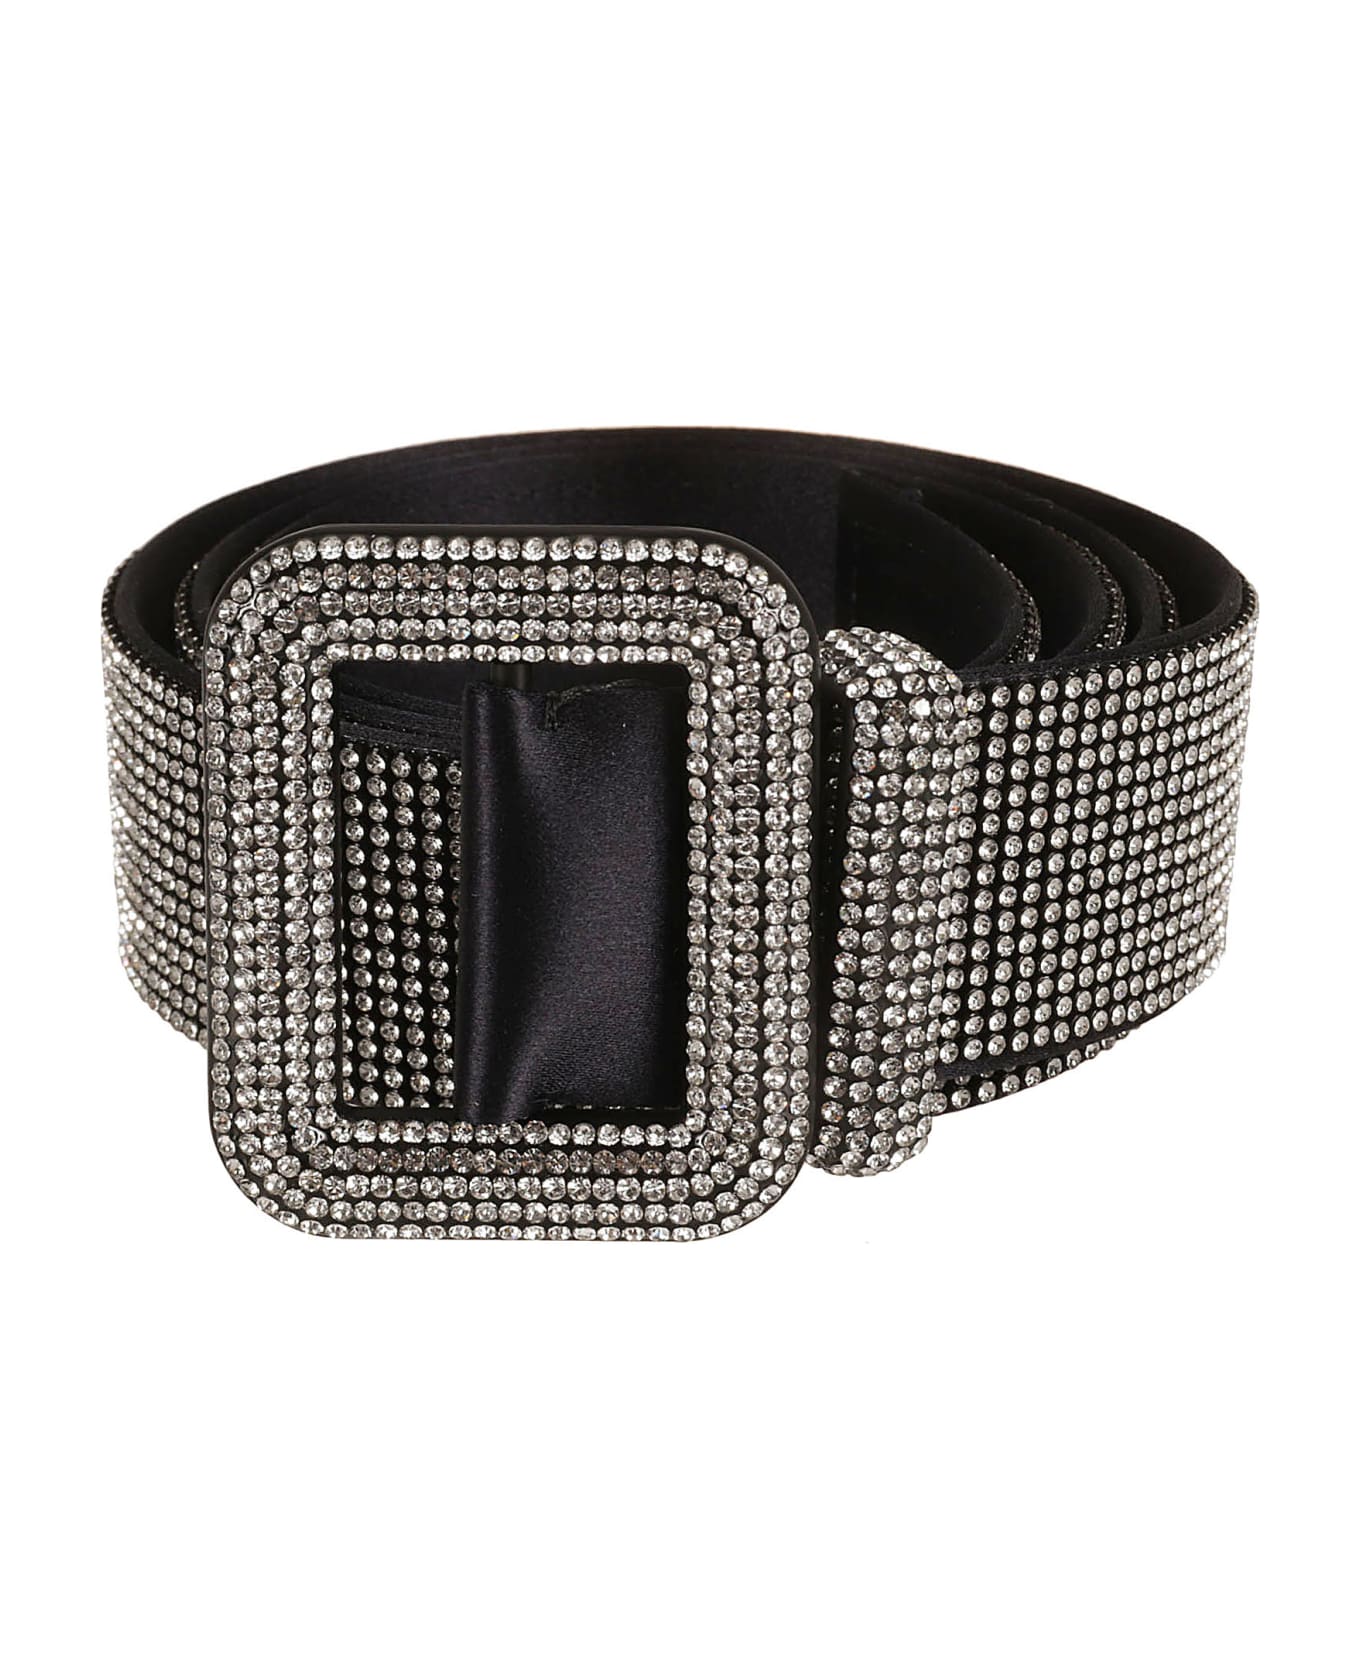 Benedetta Bruzziches Crystal Embellished Belt - The World Is Not E